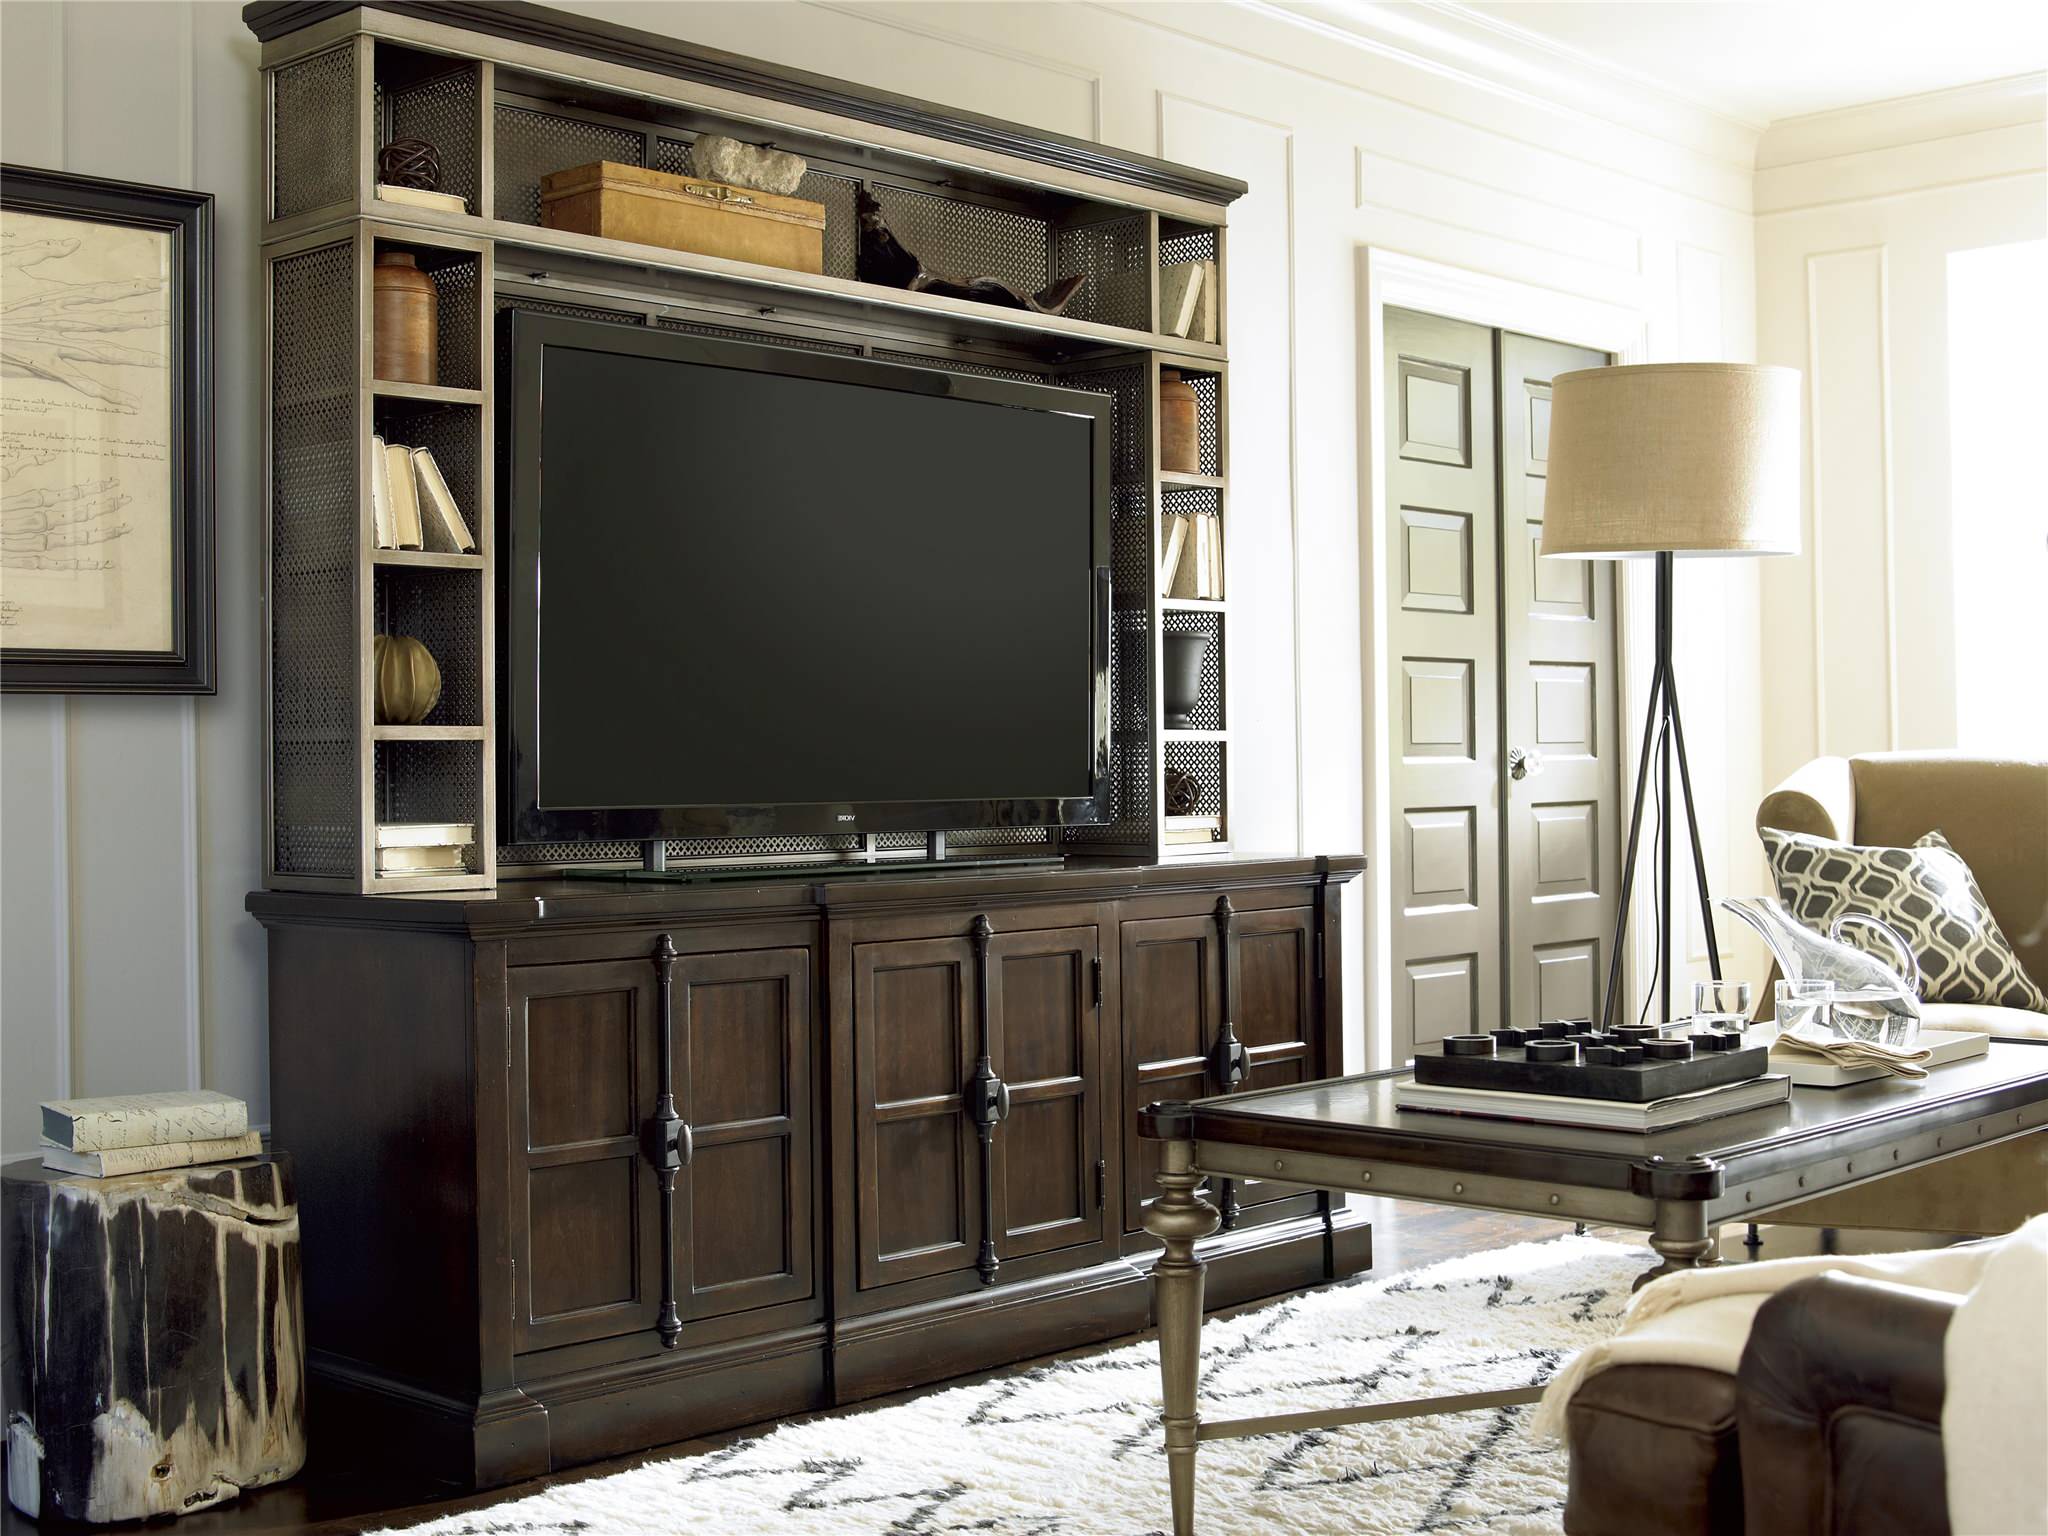 Mesh Front Media Cabinets - Photos & Ideas